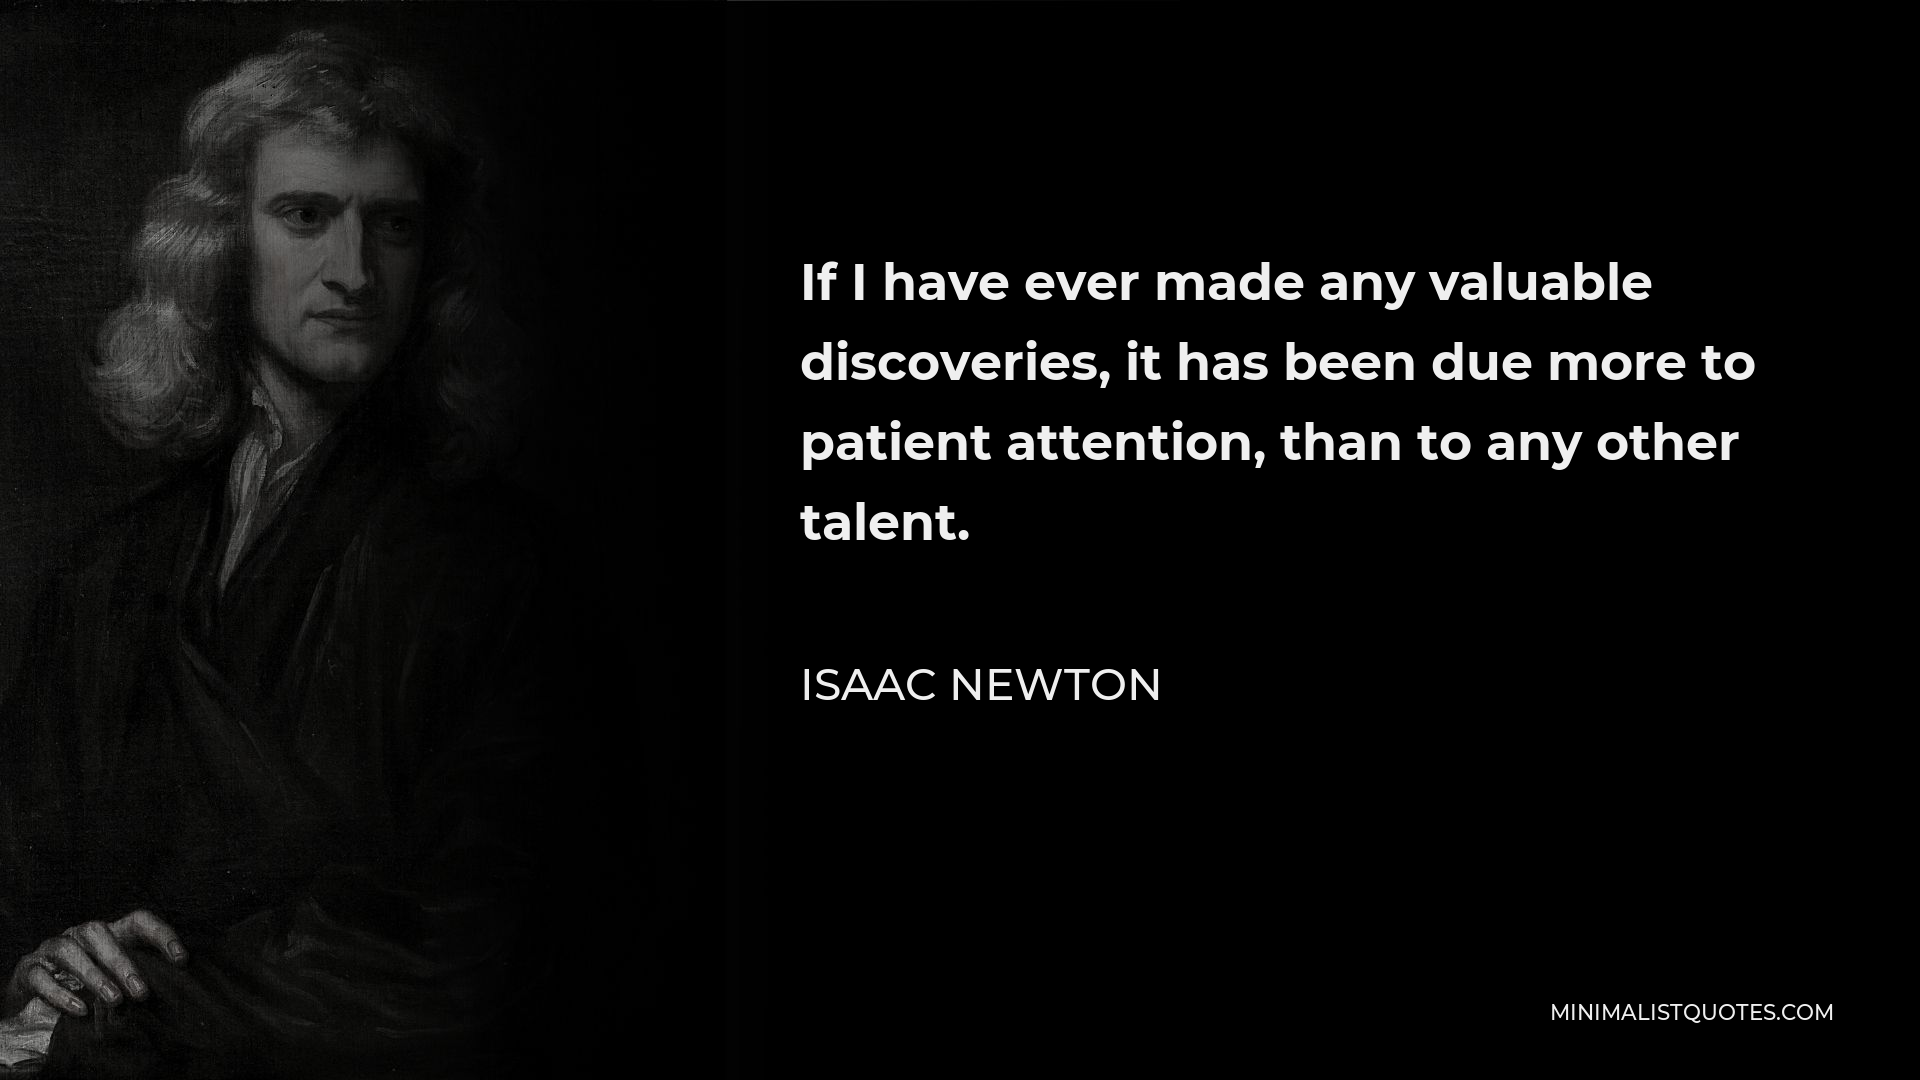 Isaac Newton Quote - If I have ever made any valuable discoveries, it has been due more to patient attention, than to any other talent.